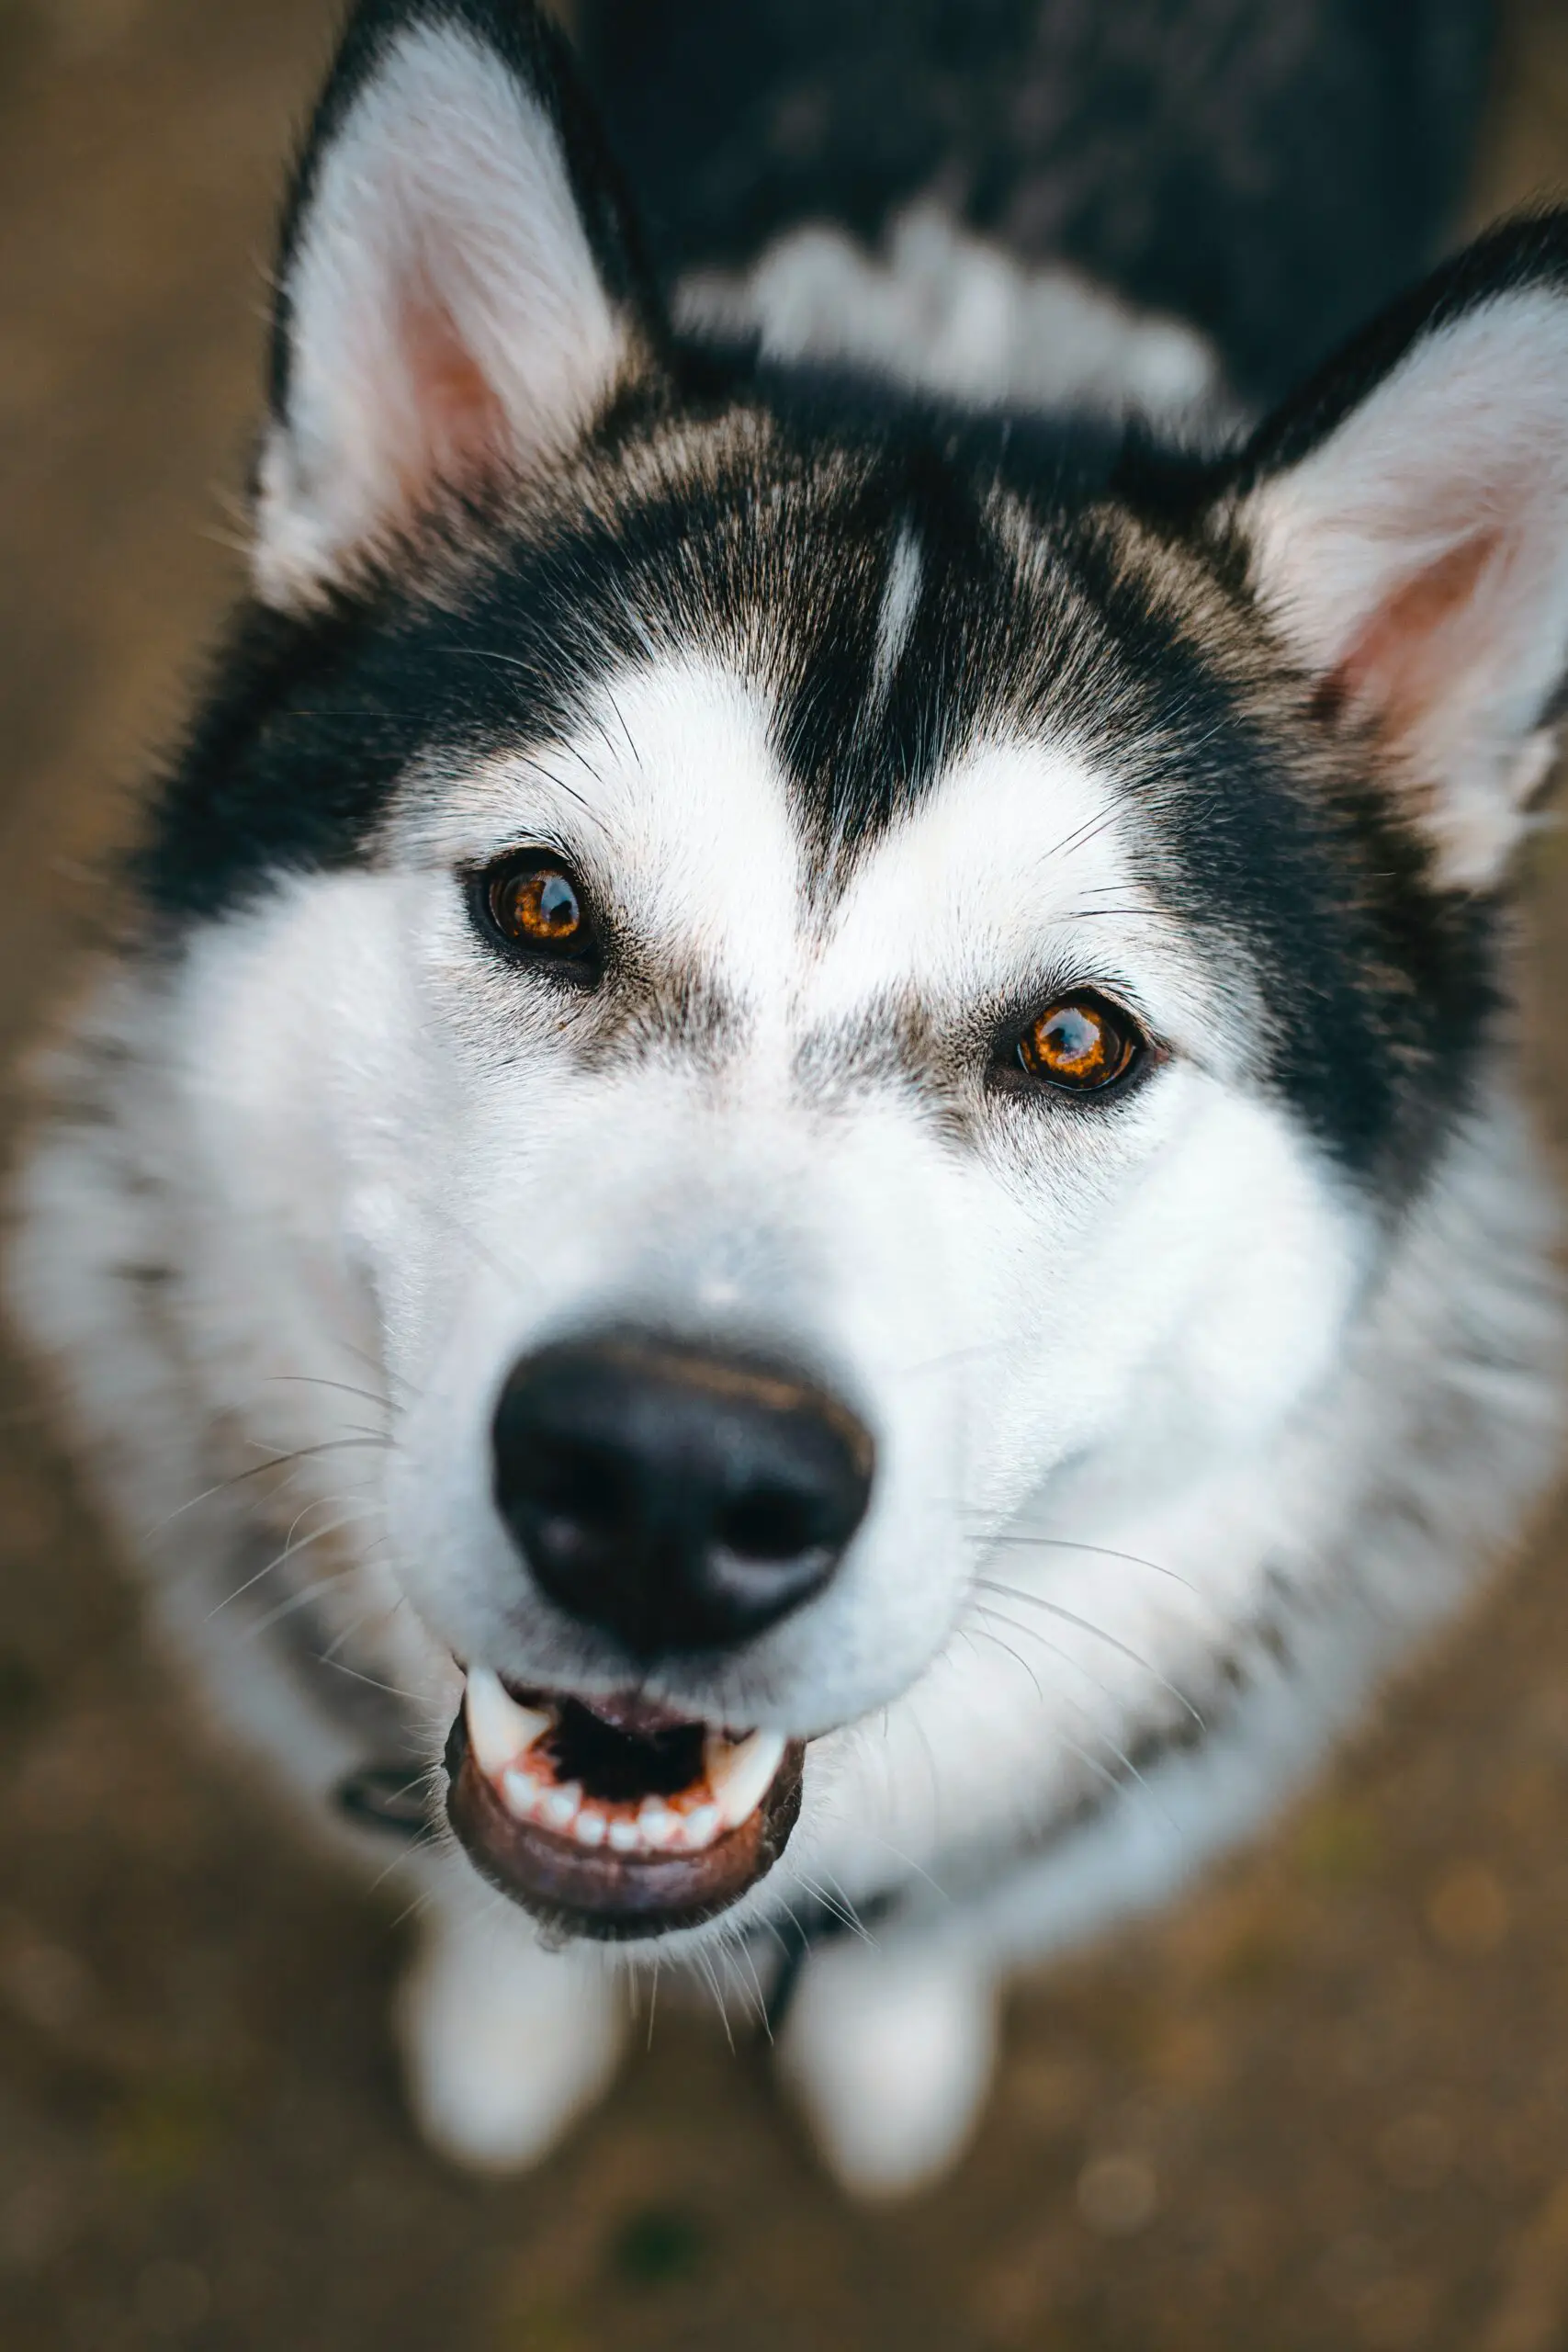 160+ Most Unique Badass Dog Names For Your Tough Dog